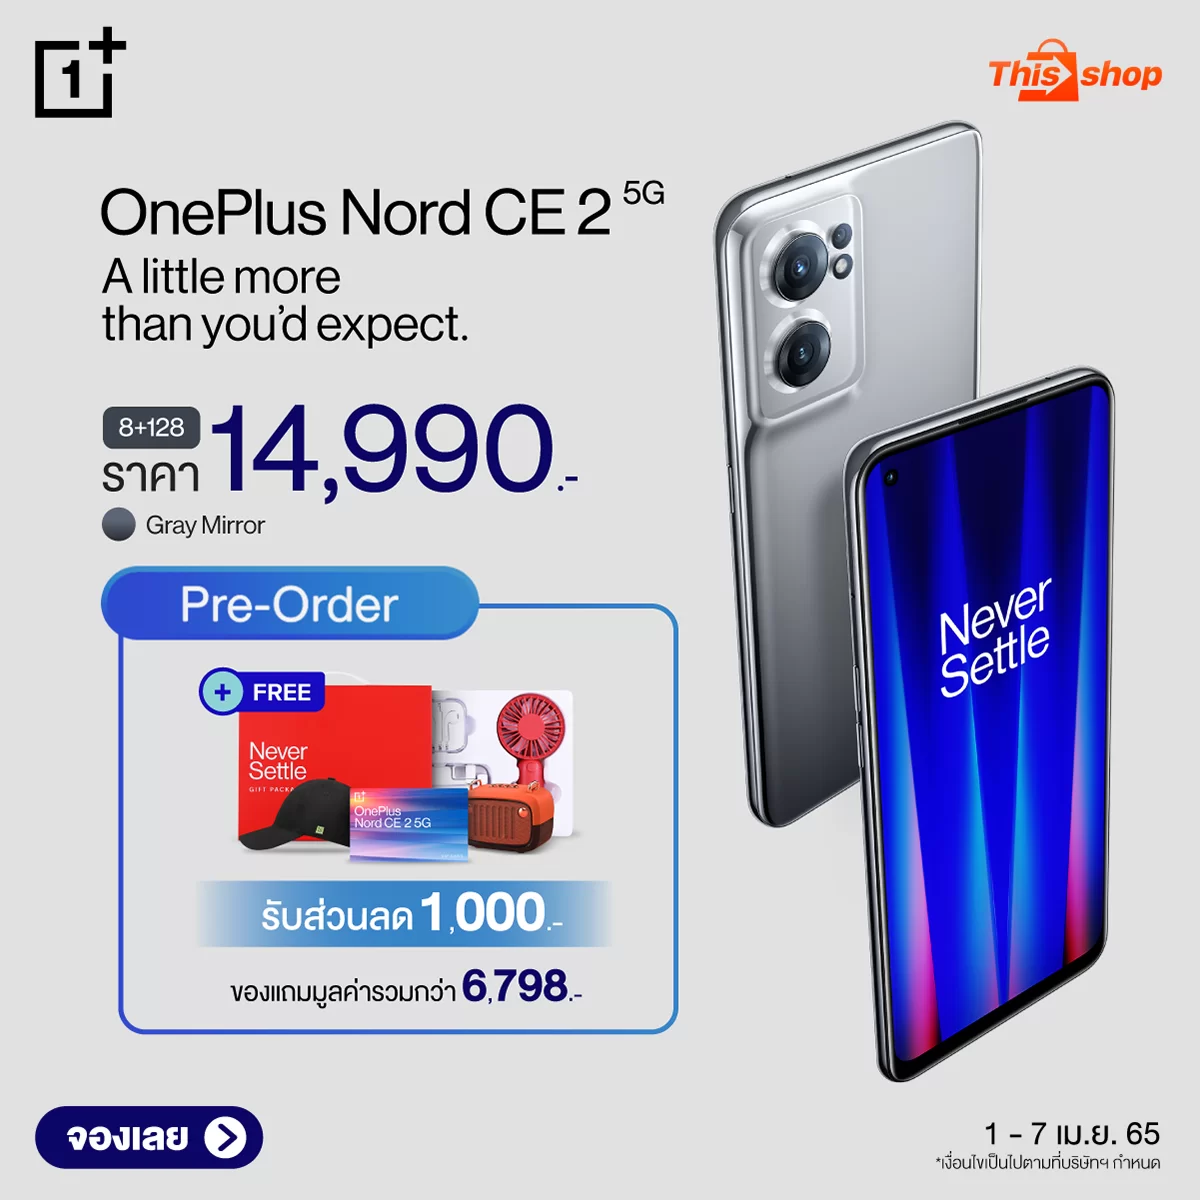 Ads-Feed-KV-OnePlus-Nord-CE-2-5G-Pre-Order-@Thisshop